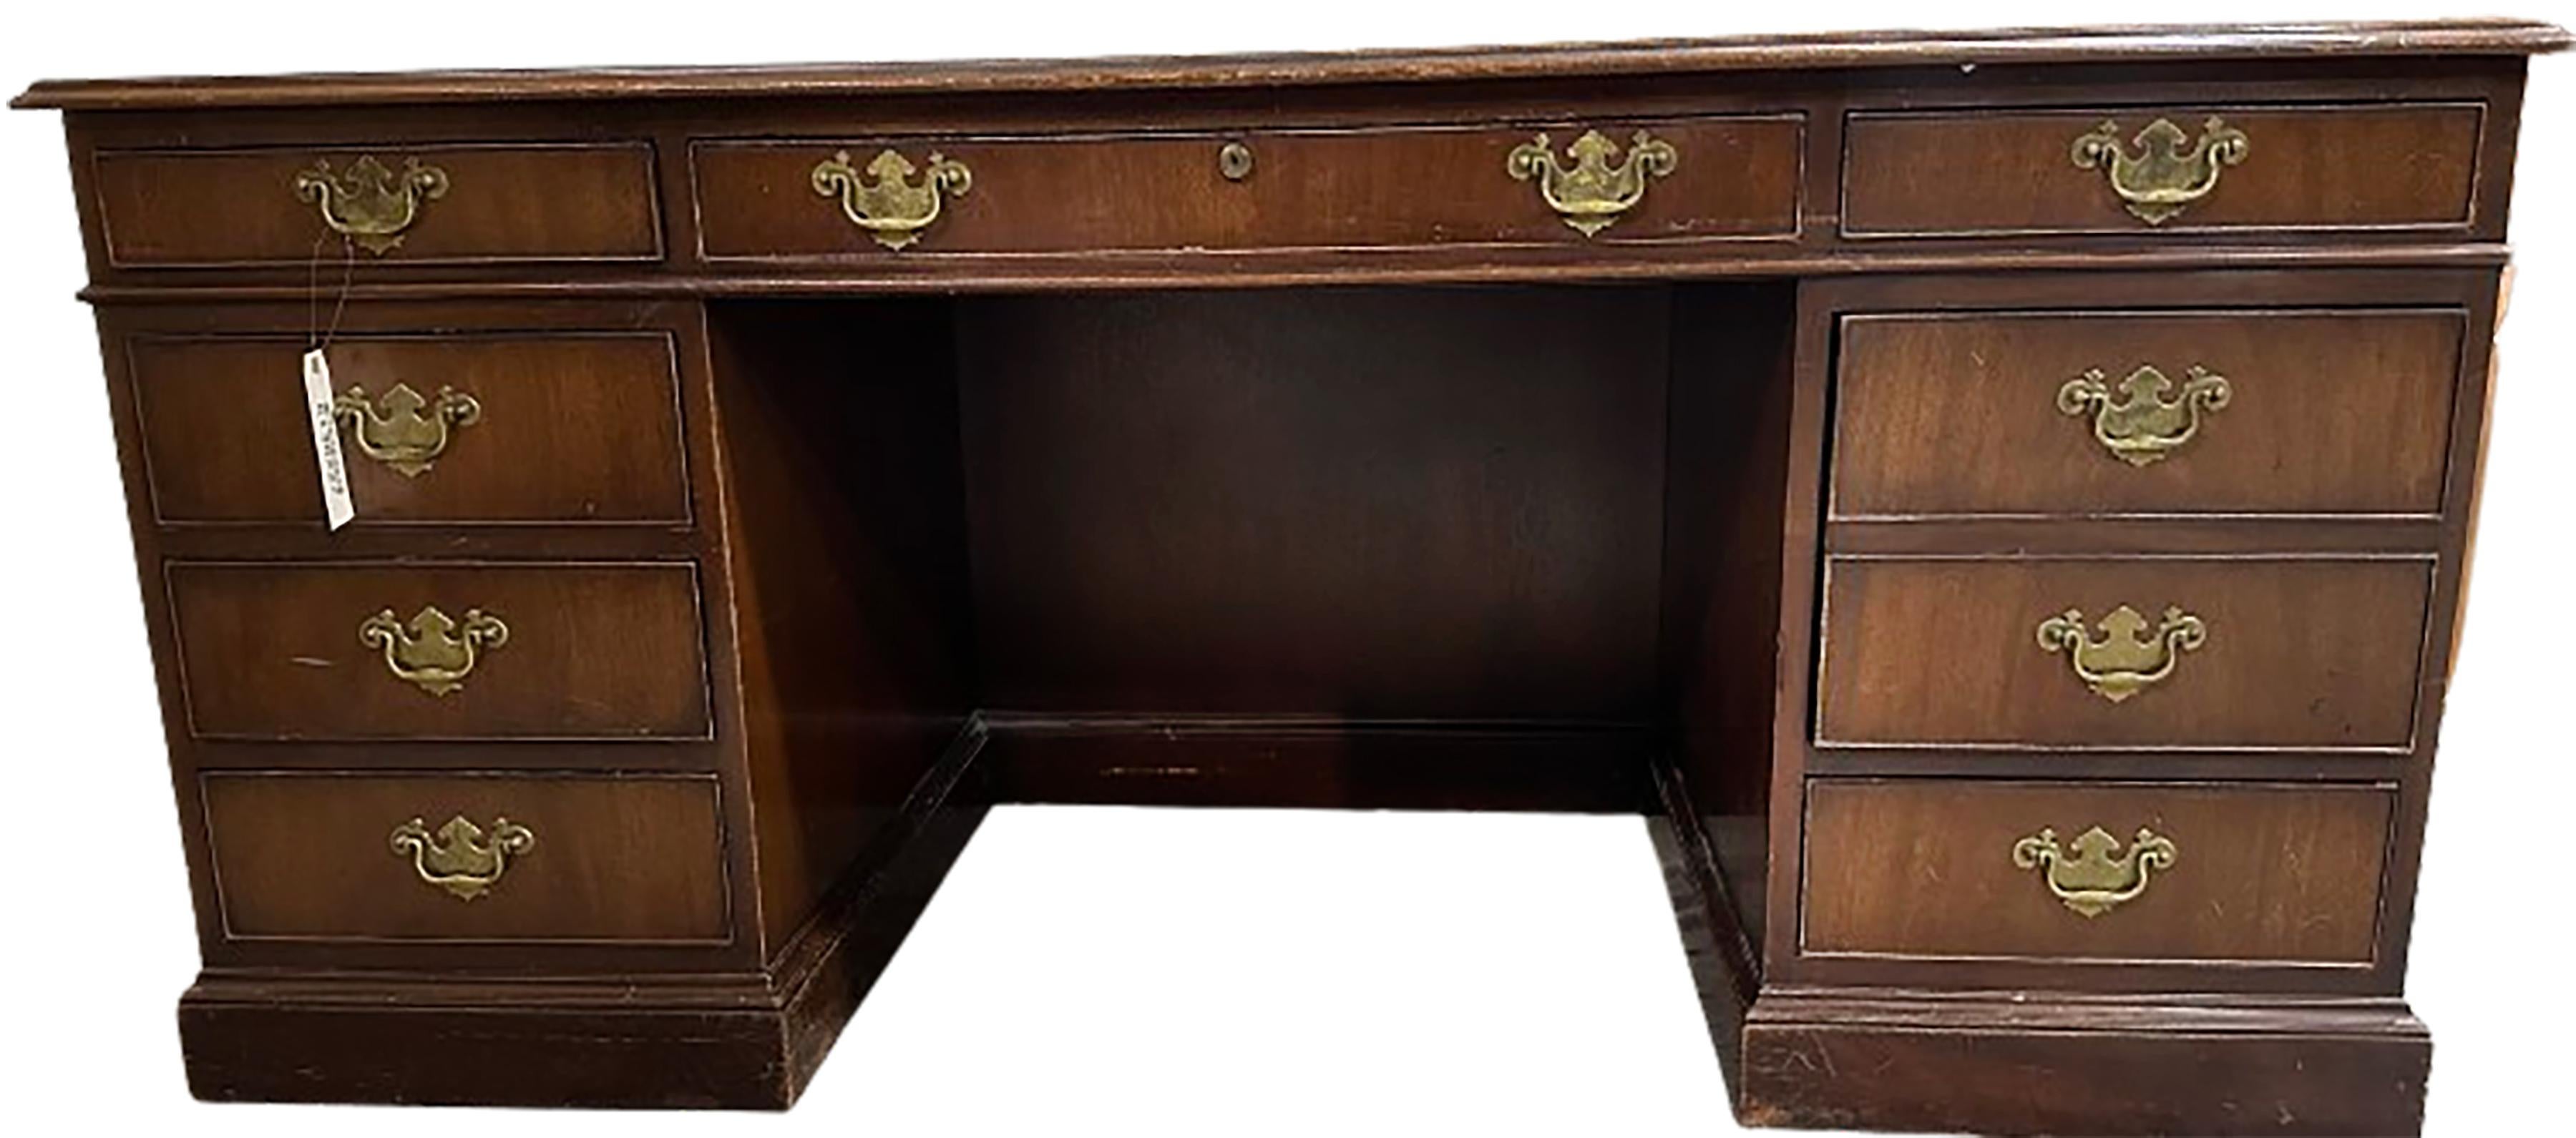 Kittenger Wood Lawyer's Desk In Good Condition For Sale In Dallas, TX